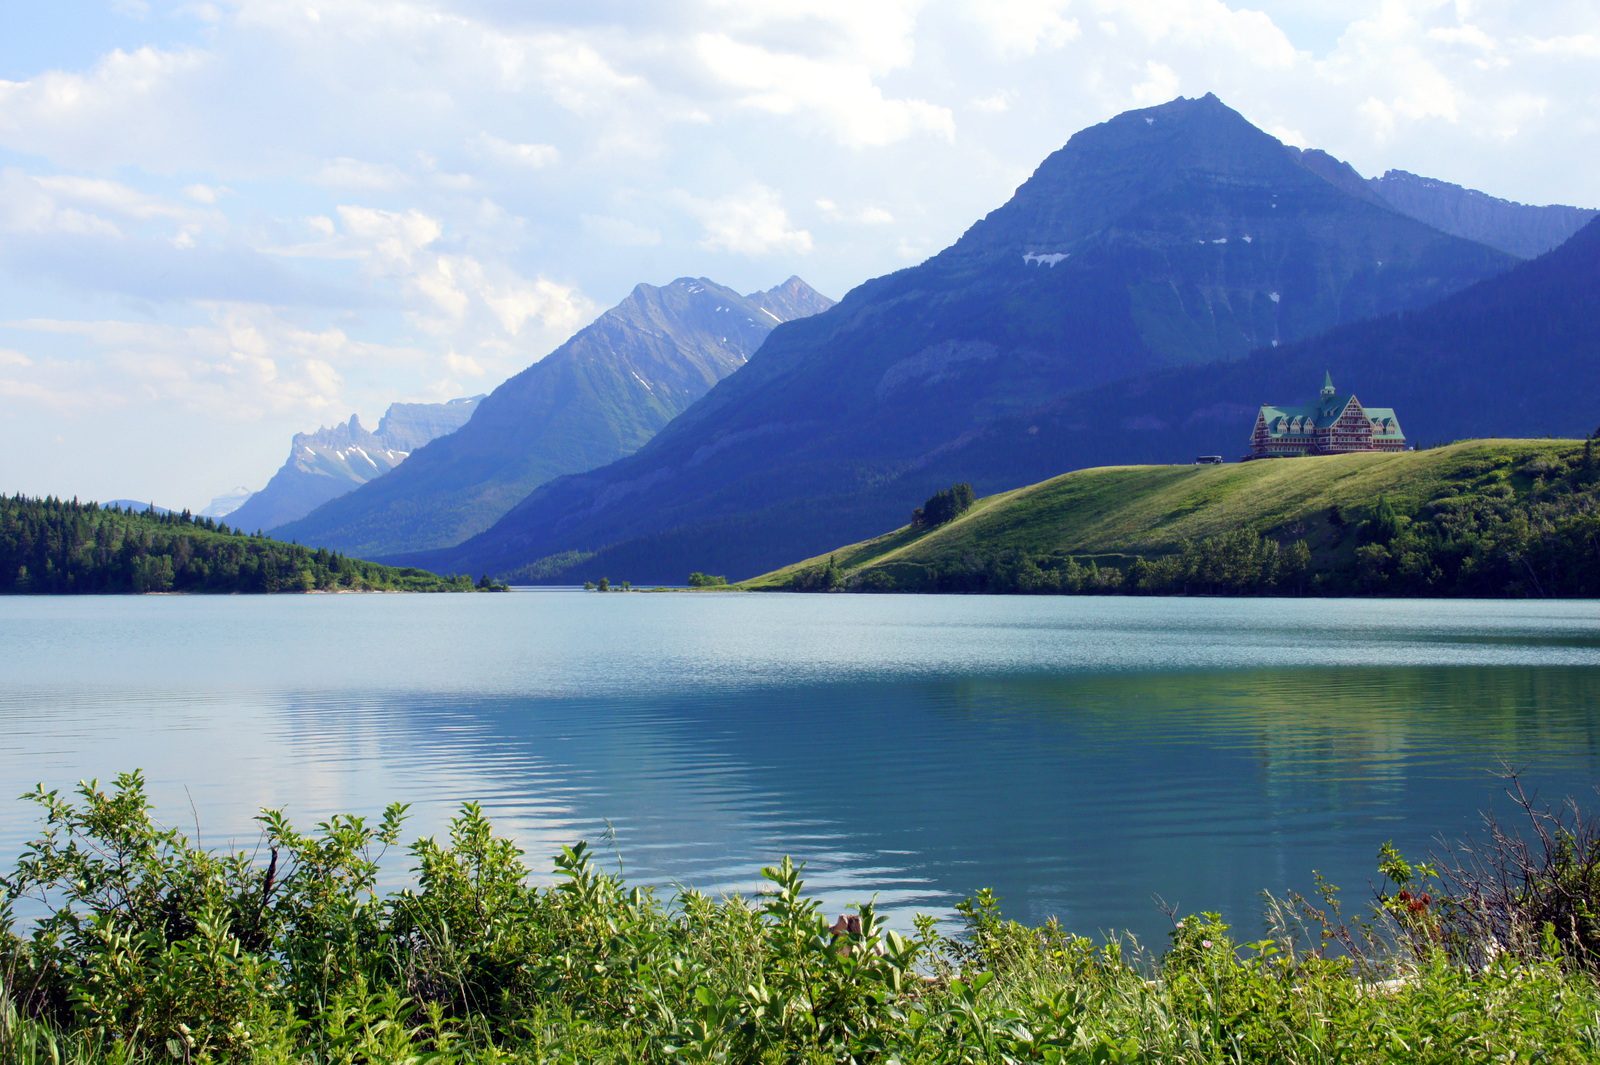 The lovely Waterton Lake and the Prince of Wales Hotel on its shore. We opted for a free basement at a host's instead!